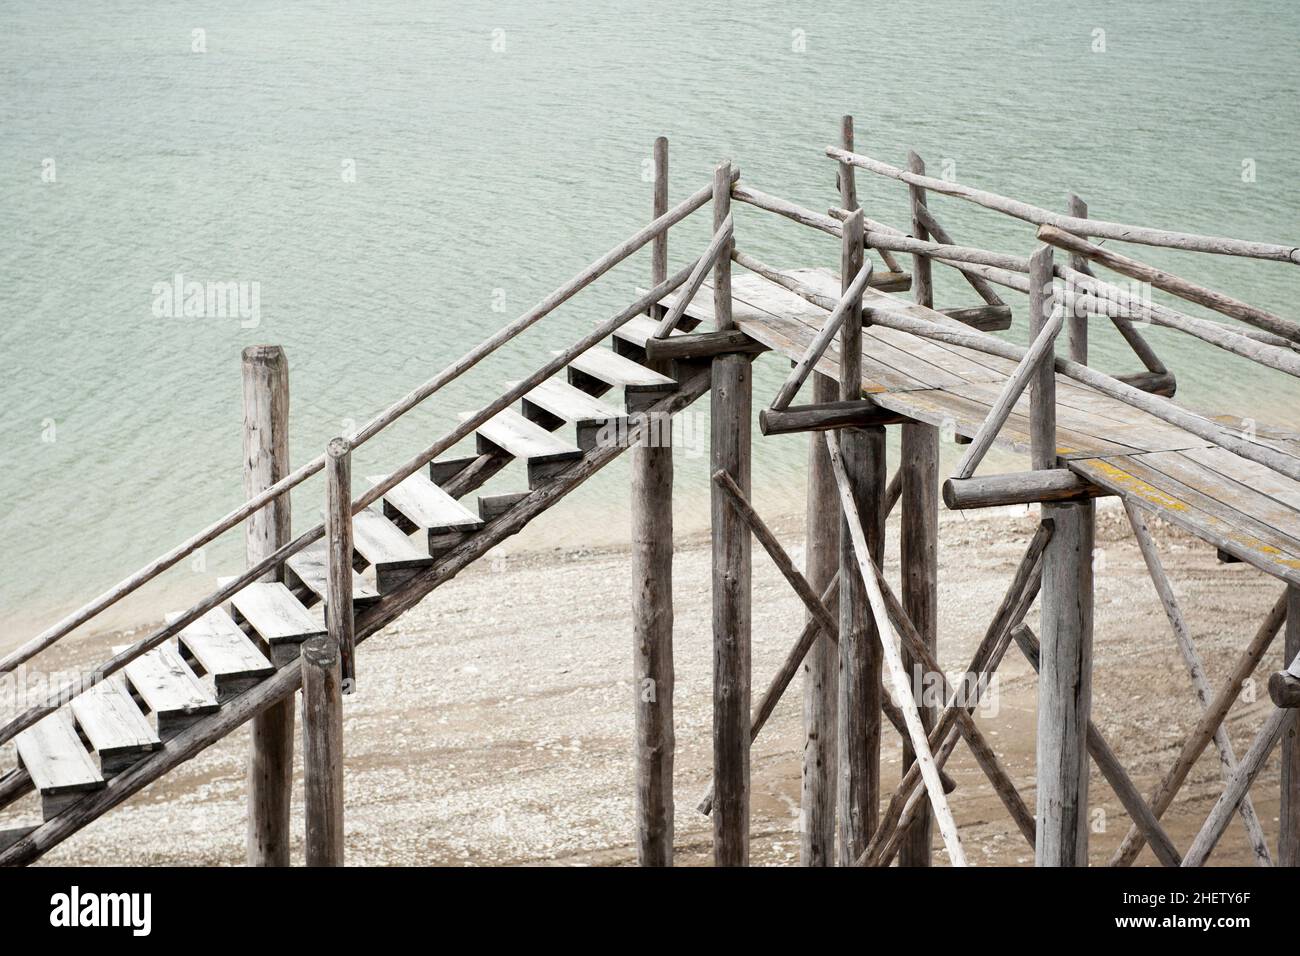 blocked obsolete wooden catwalk bridge at lake with less water and gravel at coast Stock Photo